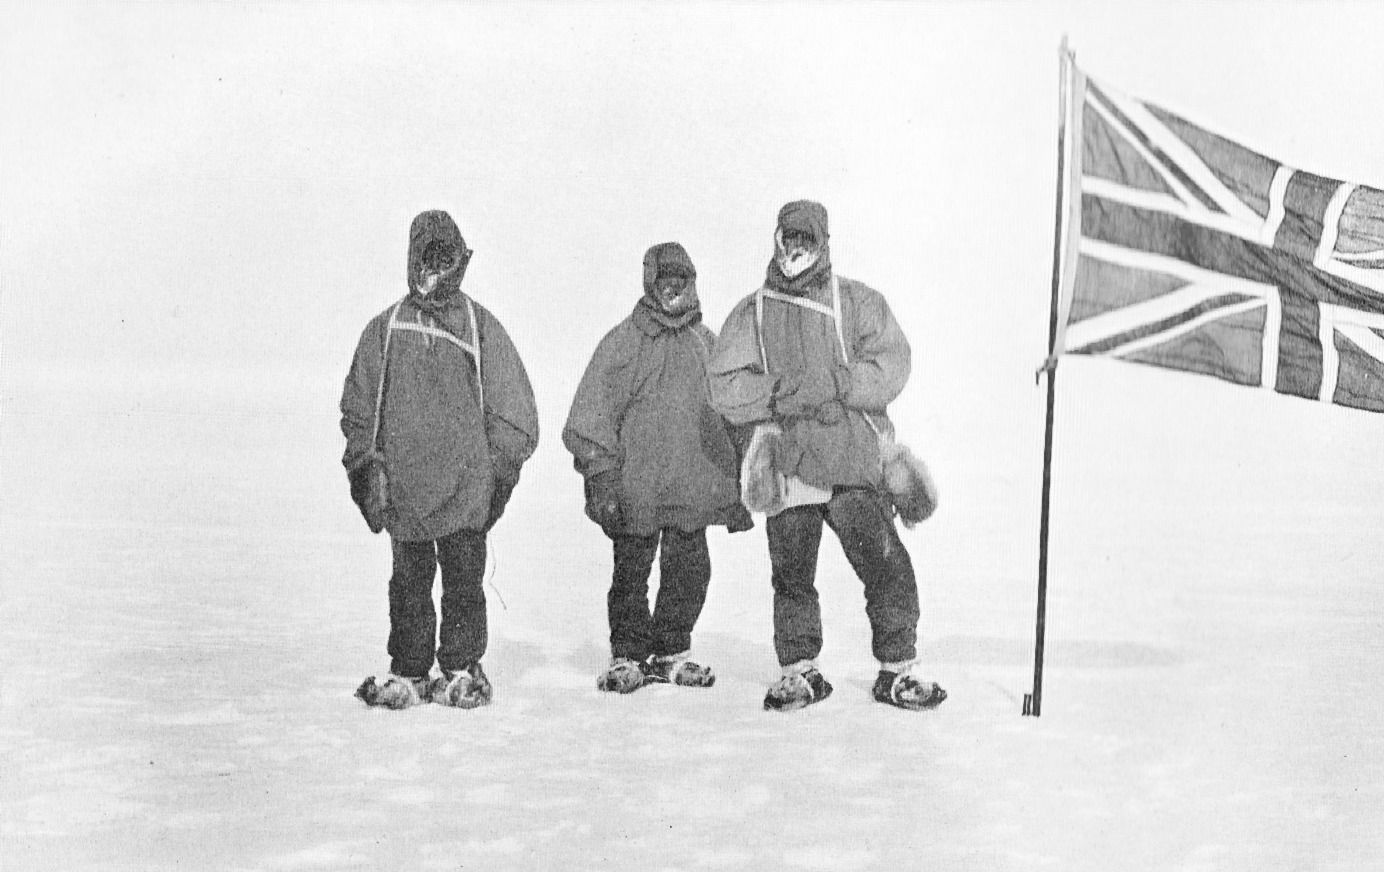 Jameson Adams, Frank Wild and Eric Marshall (from the Shackleton Expedition) plant the Union Jack at their southernmost position, 88° 23', on 9 January 1909.